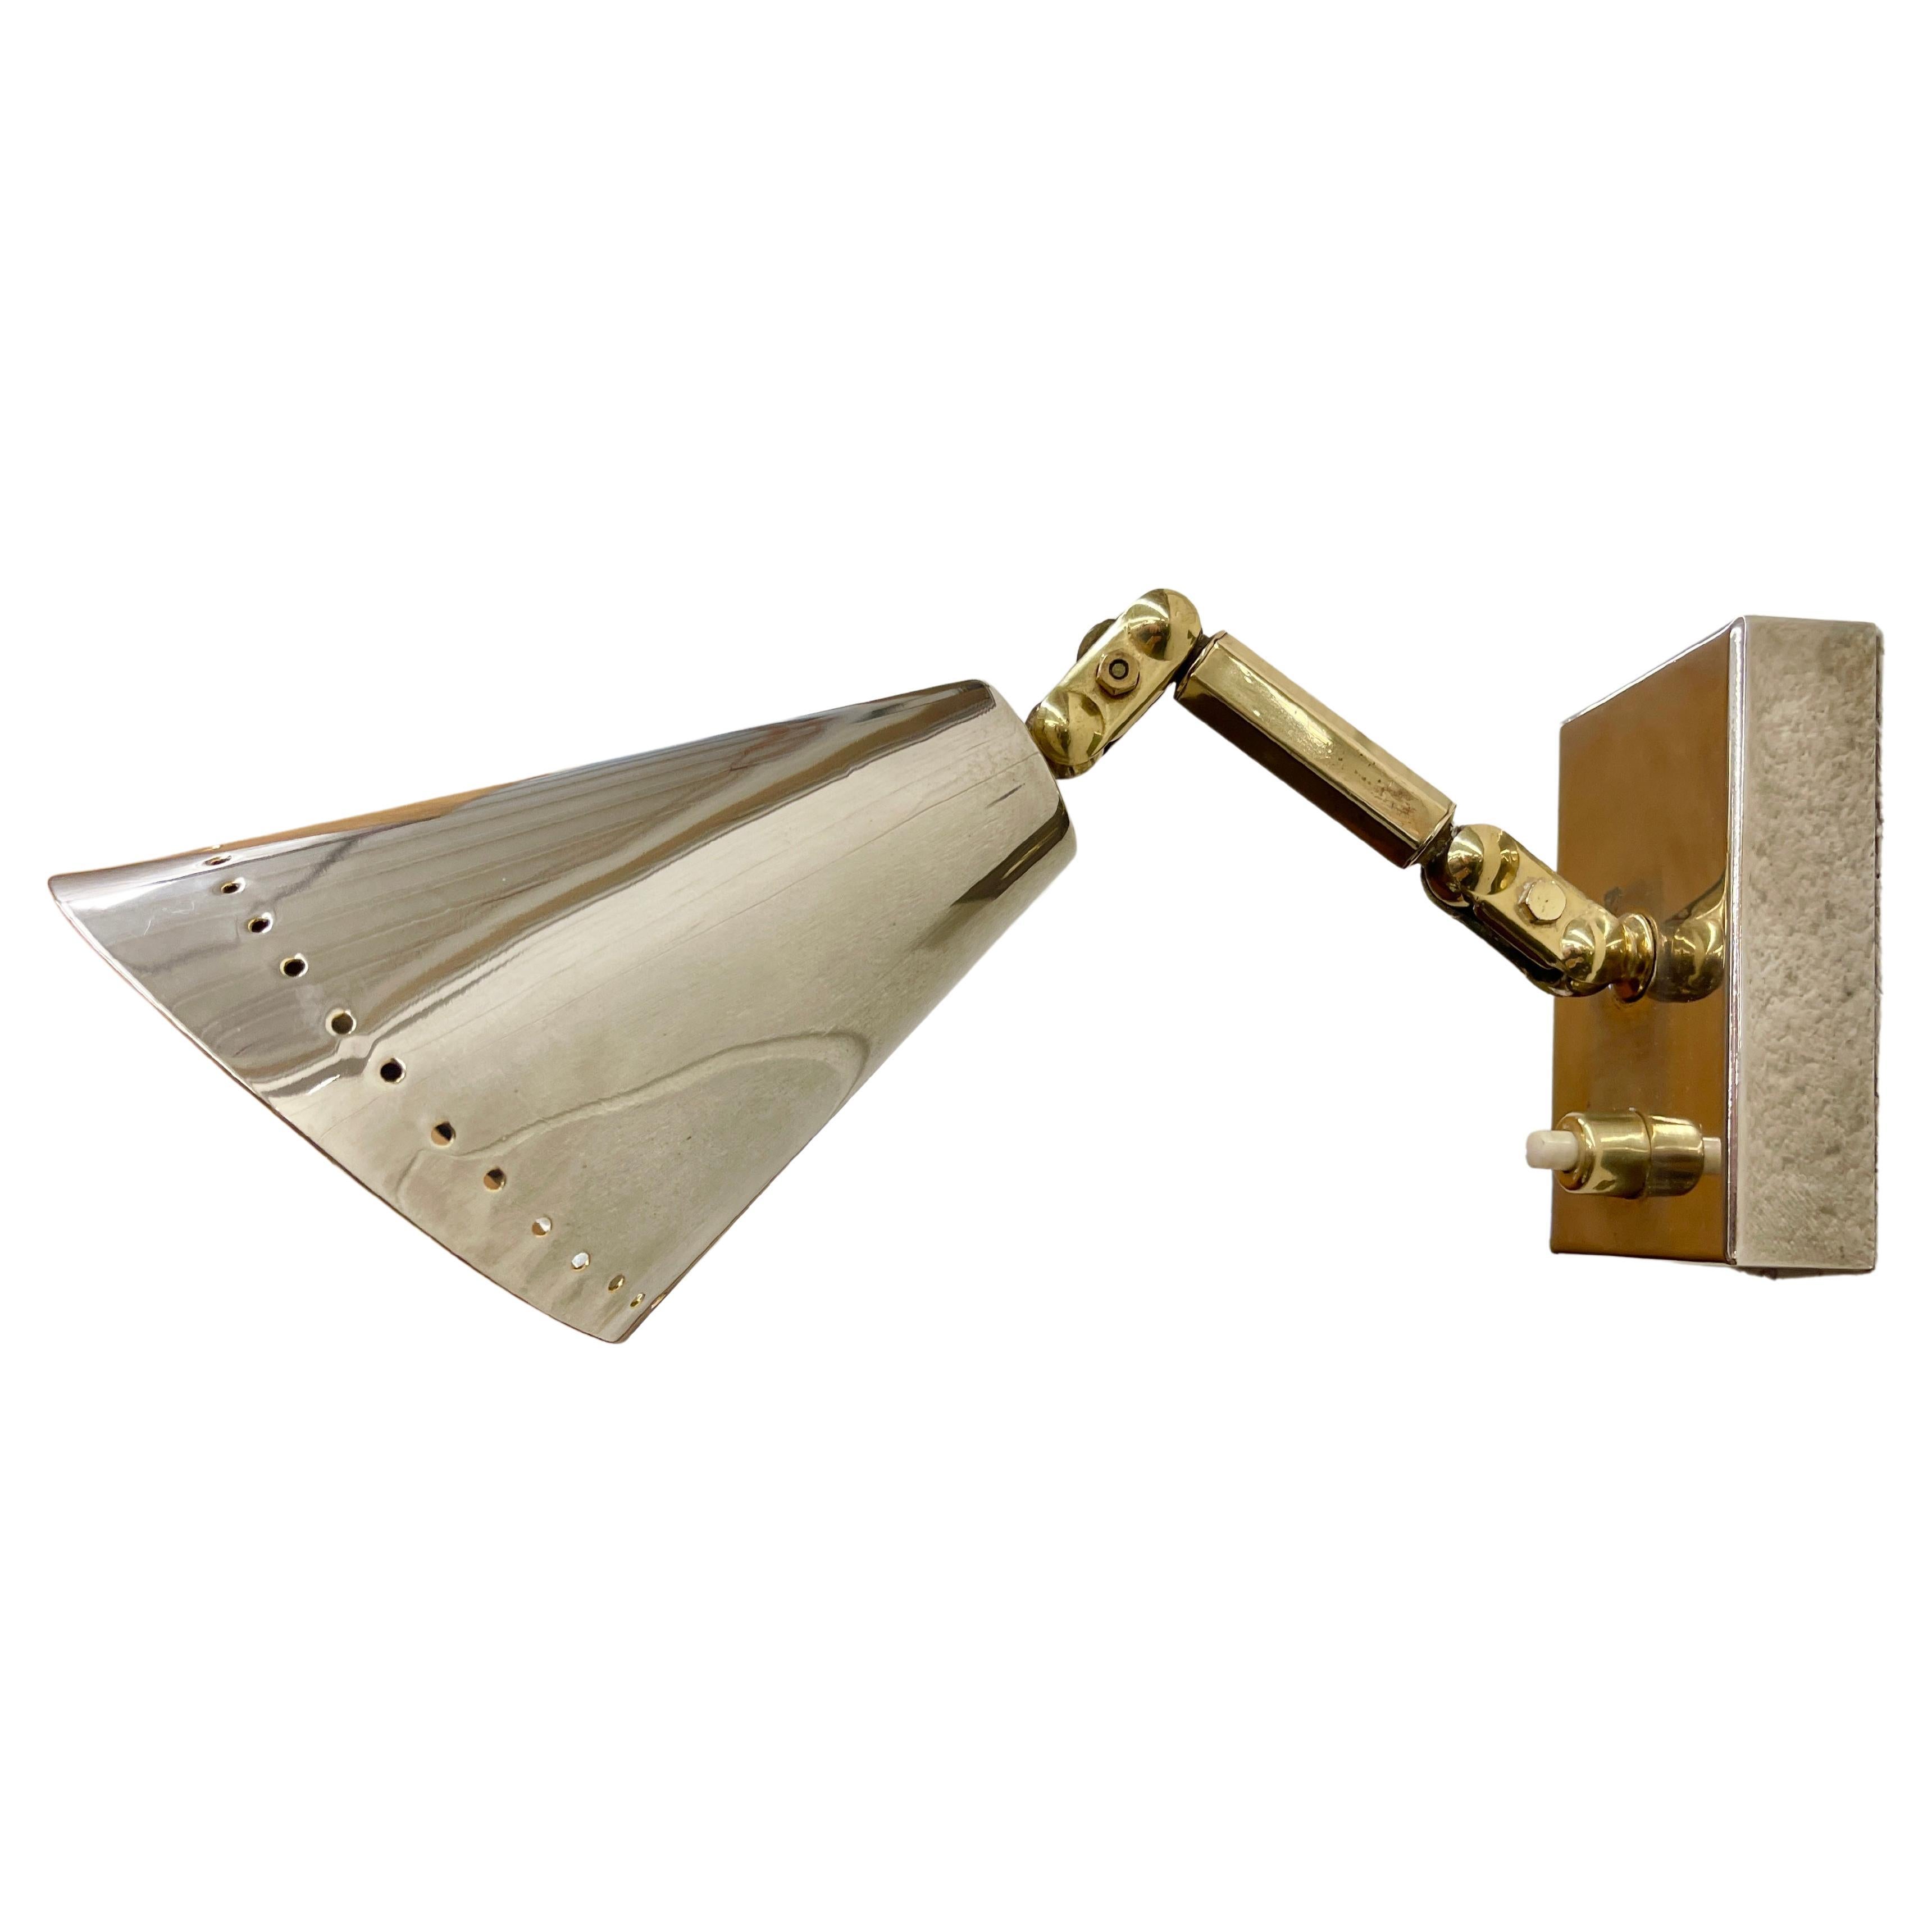 Pair of petite wall-mounted multi-positional sconces from France circa late 1950's. Two tone with polished nickel plated brass perforated cones and mounting box (3.25